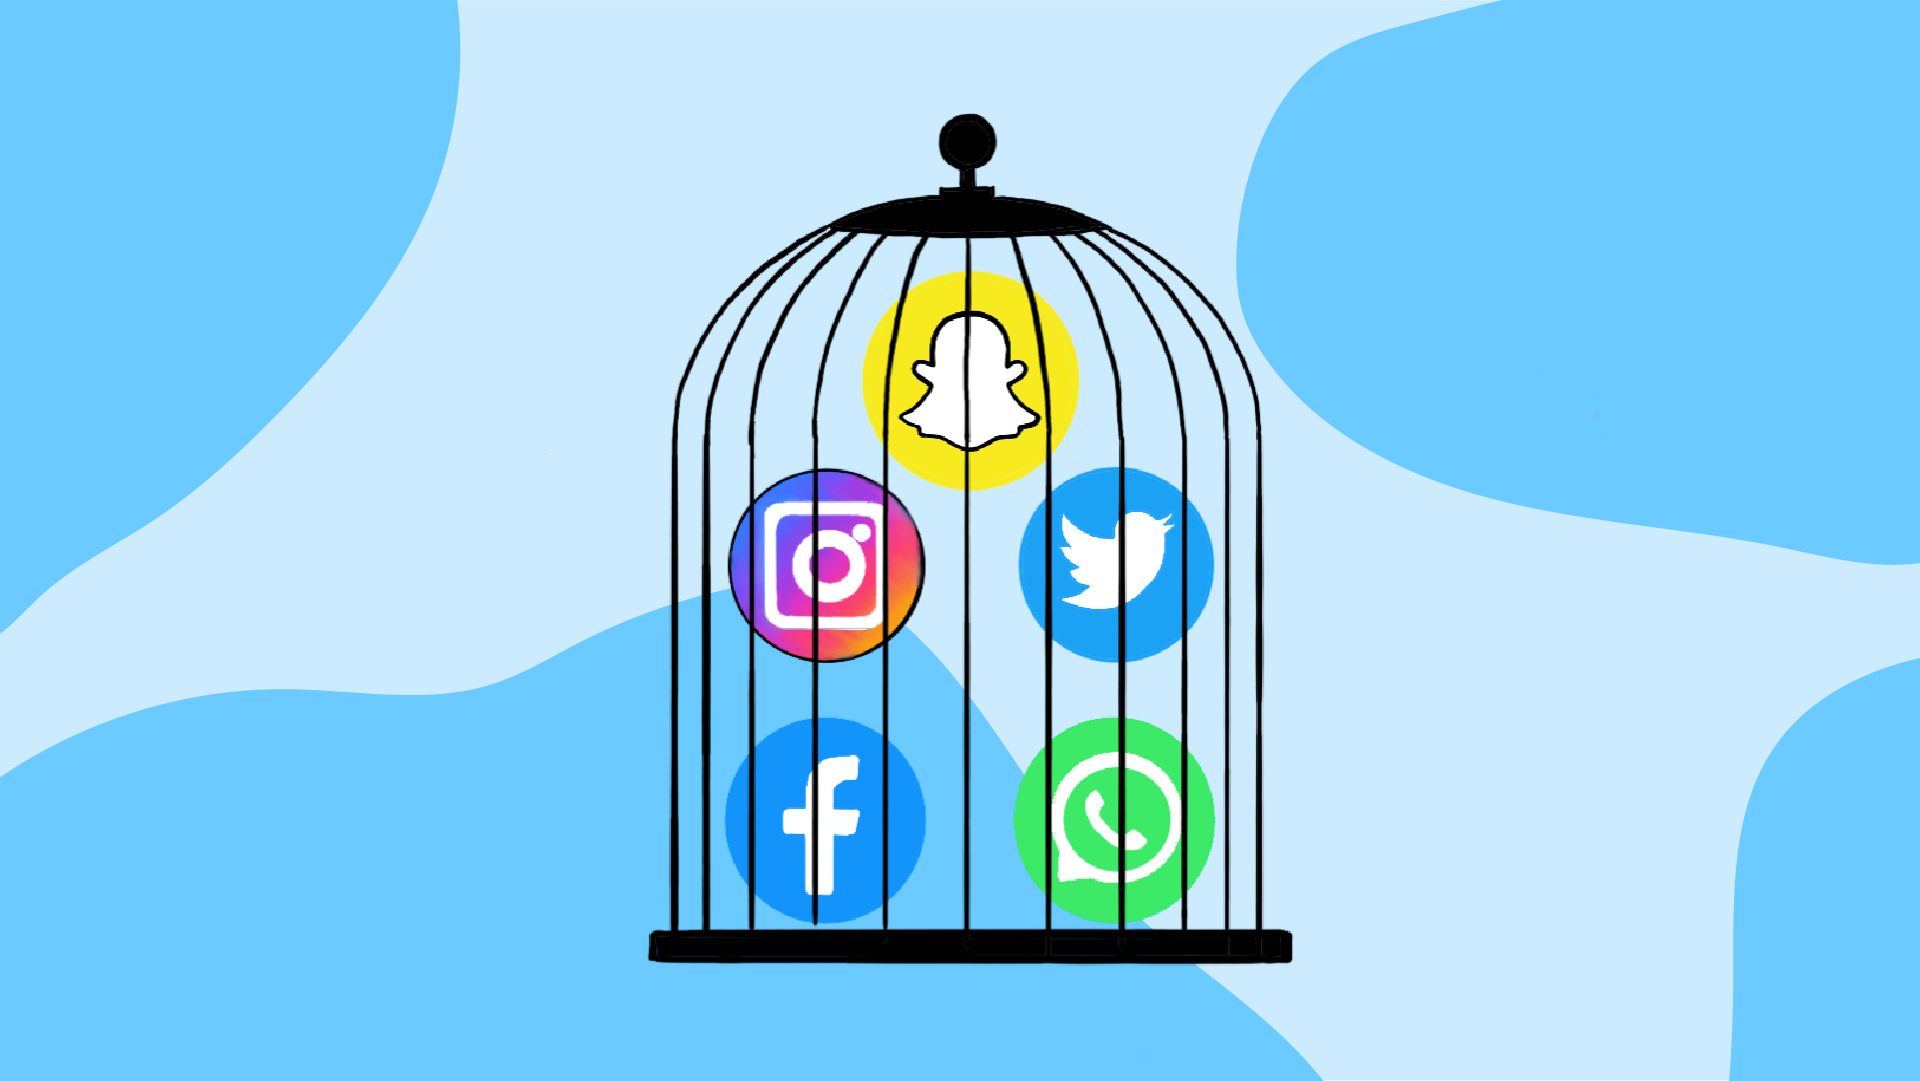 Illustration of multiple social media app icons in a cage